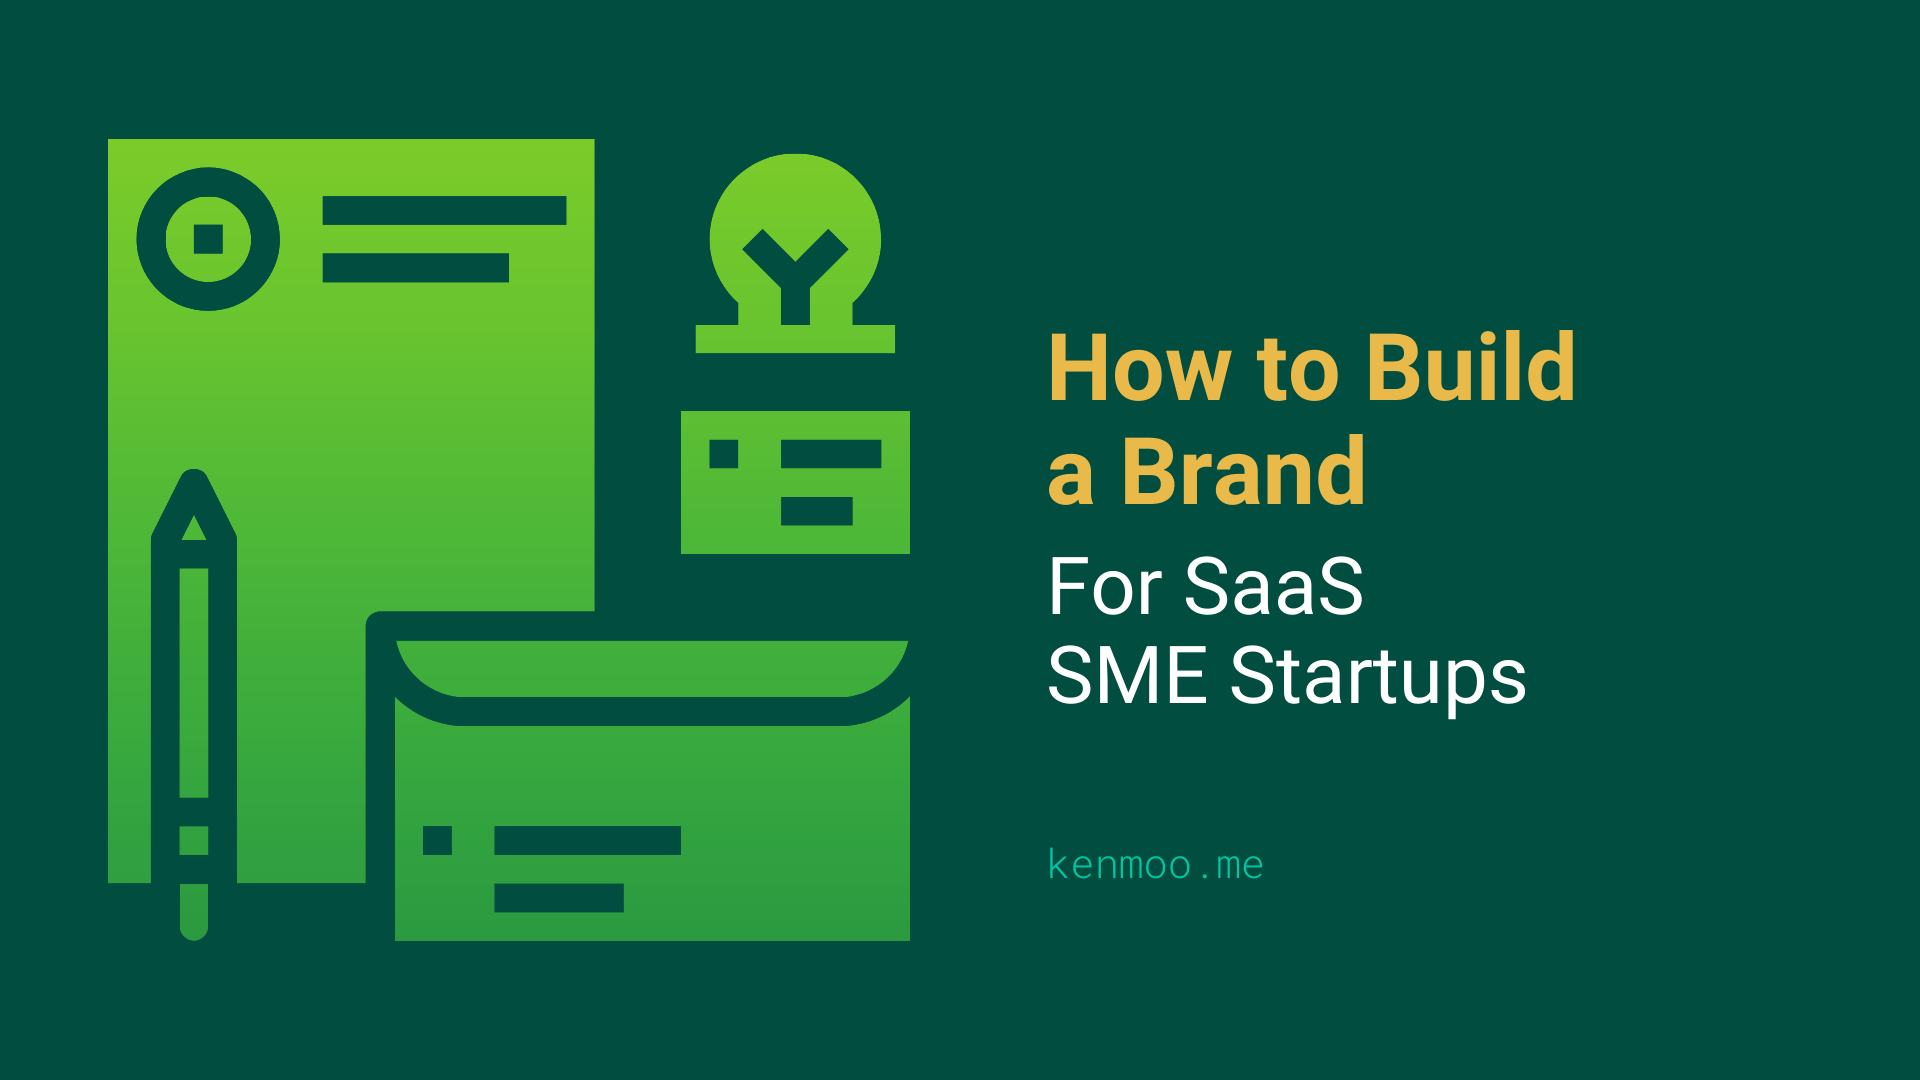 How to Build a Brand for SaaS SME Startups